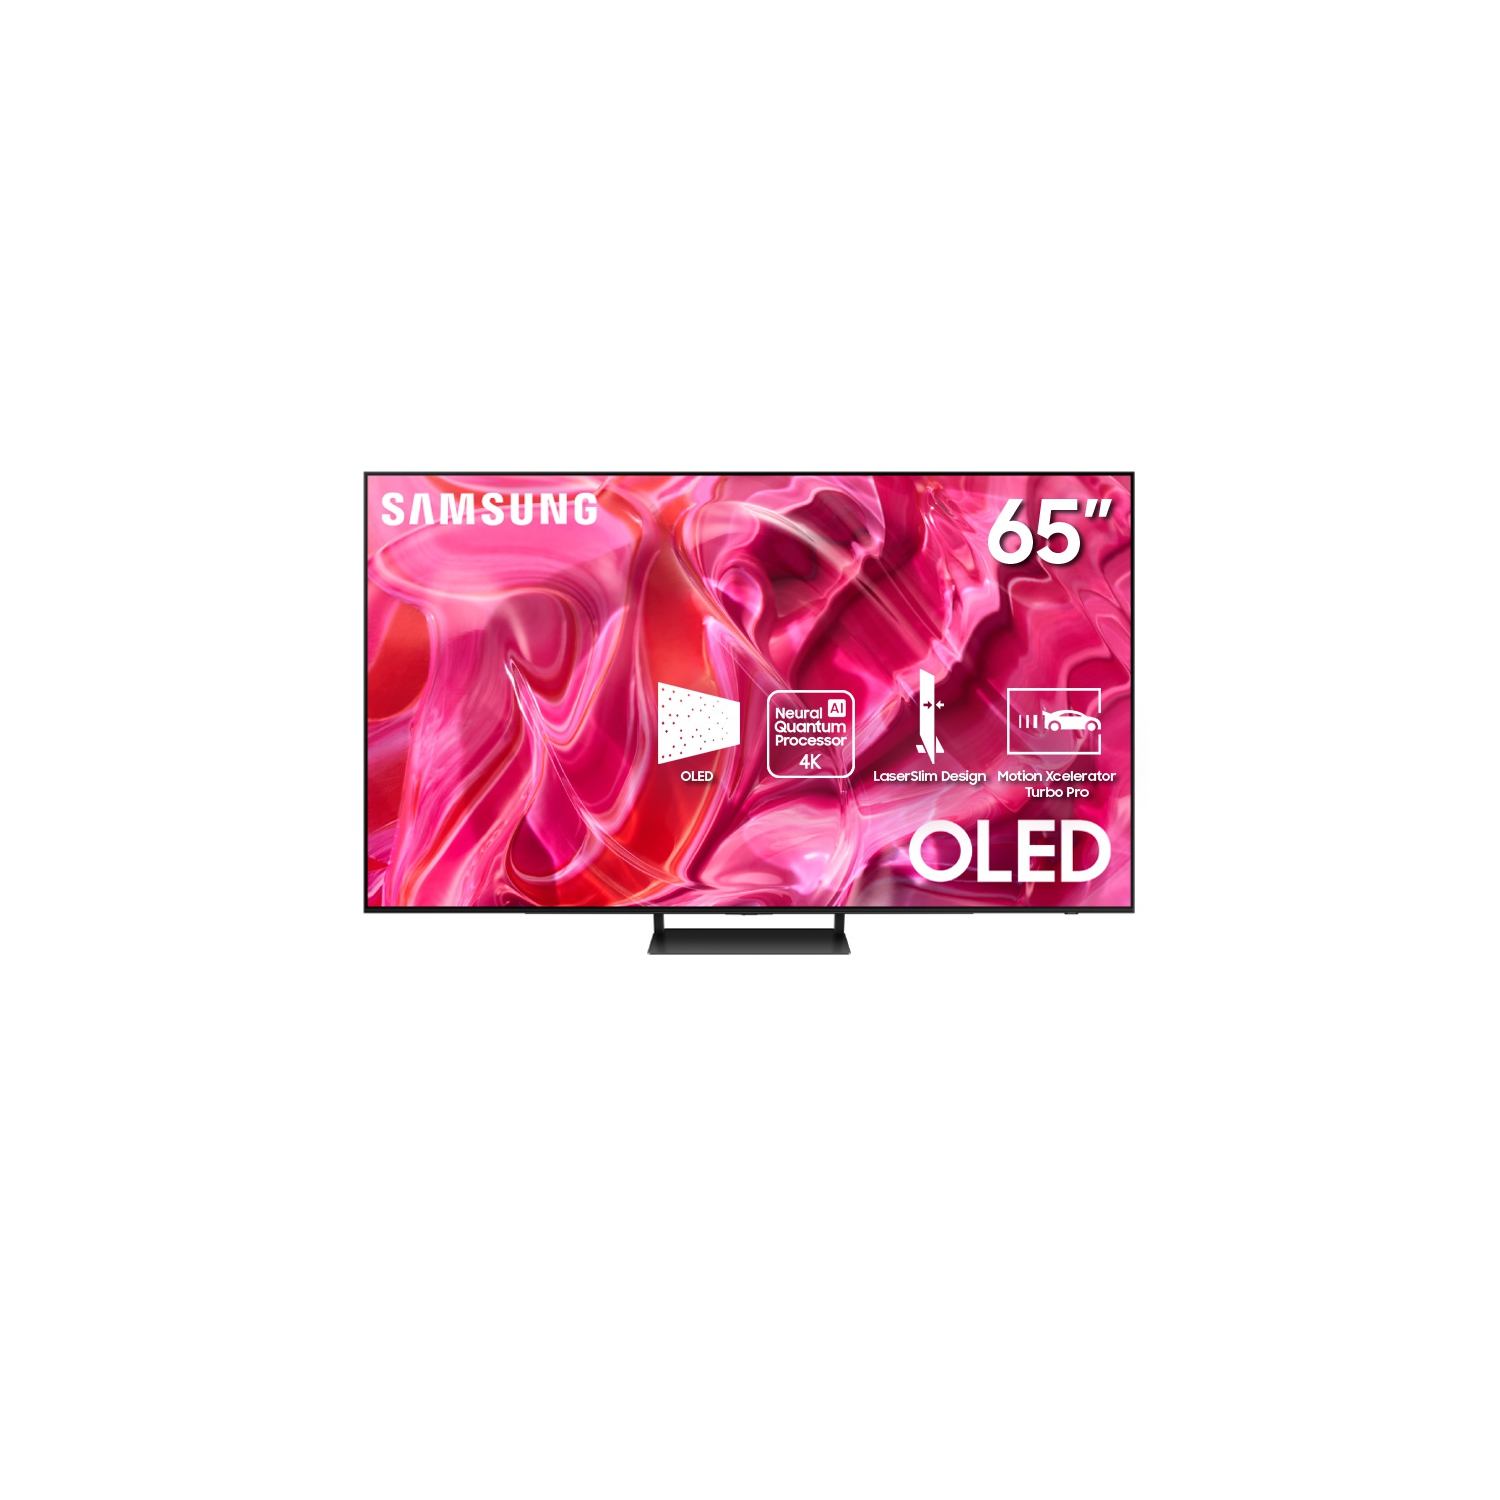 Samsung 65" 4K UHD HDR OLED Tizen Smart TV (QN65S90CAFXZC) - 2023 Open Box 10/10 Condition with 1 Year Samsung Warranty